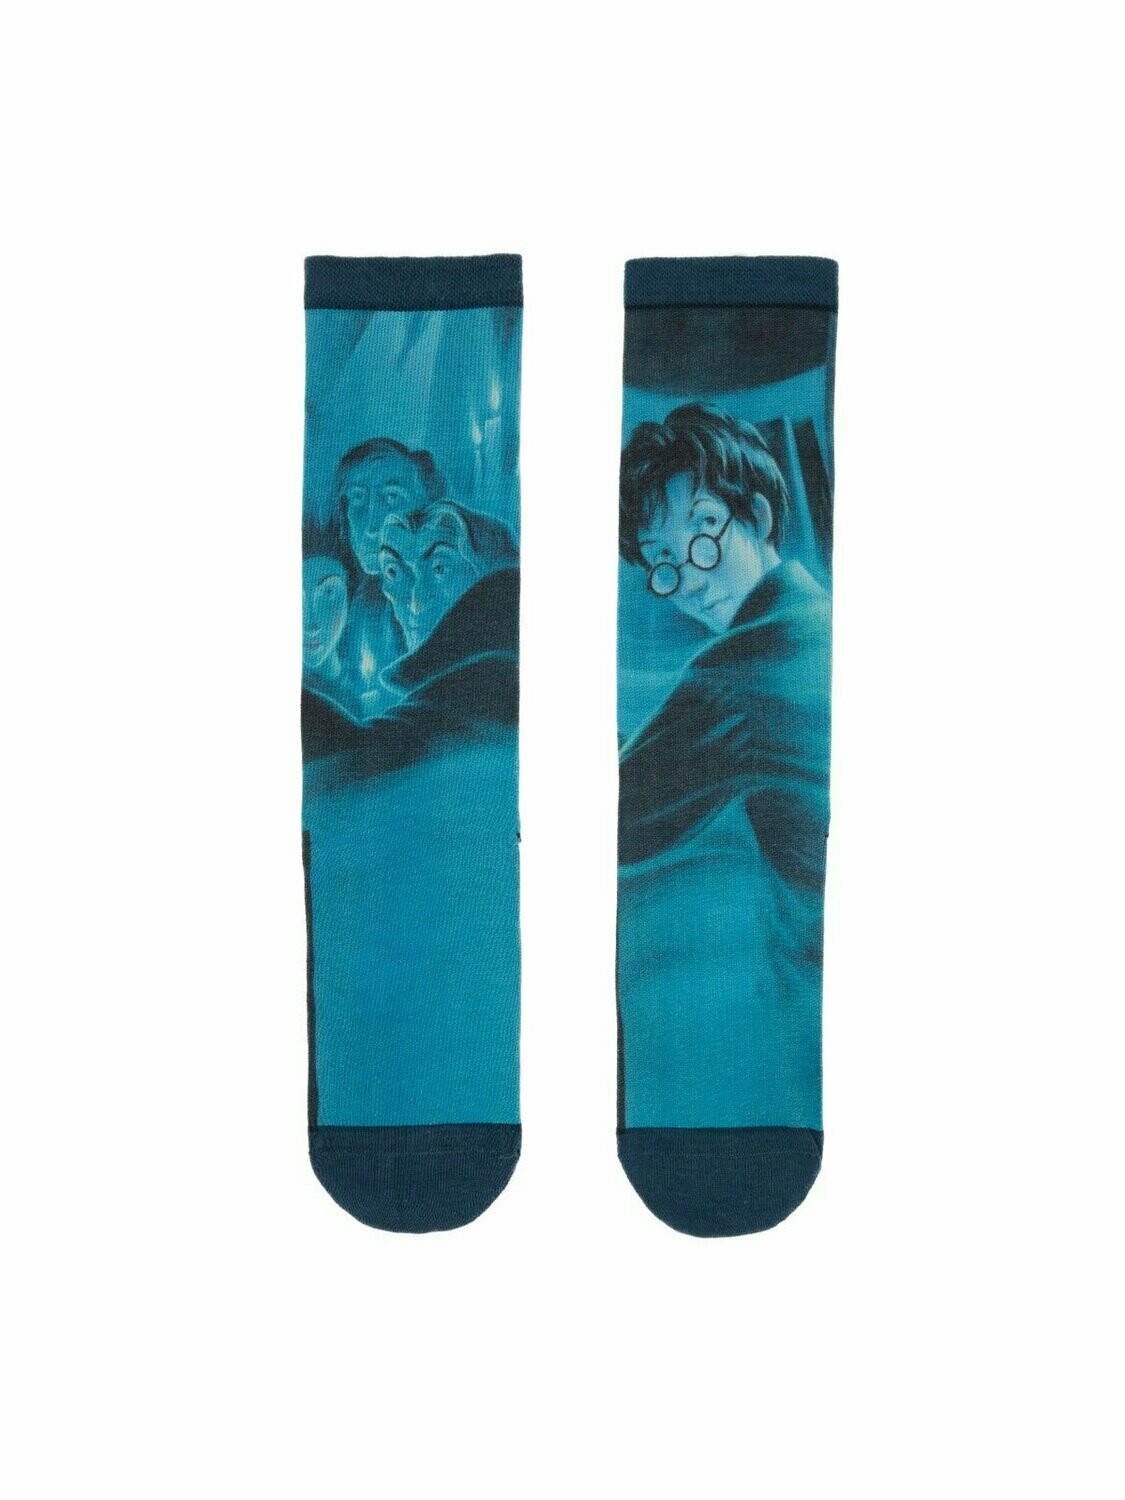 Harry Potter and the Order of the Phoenix socks